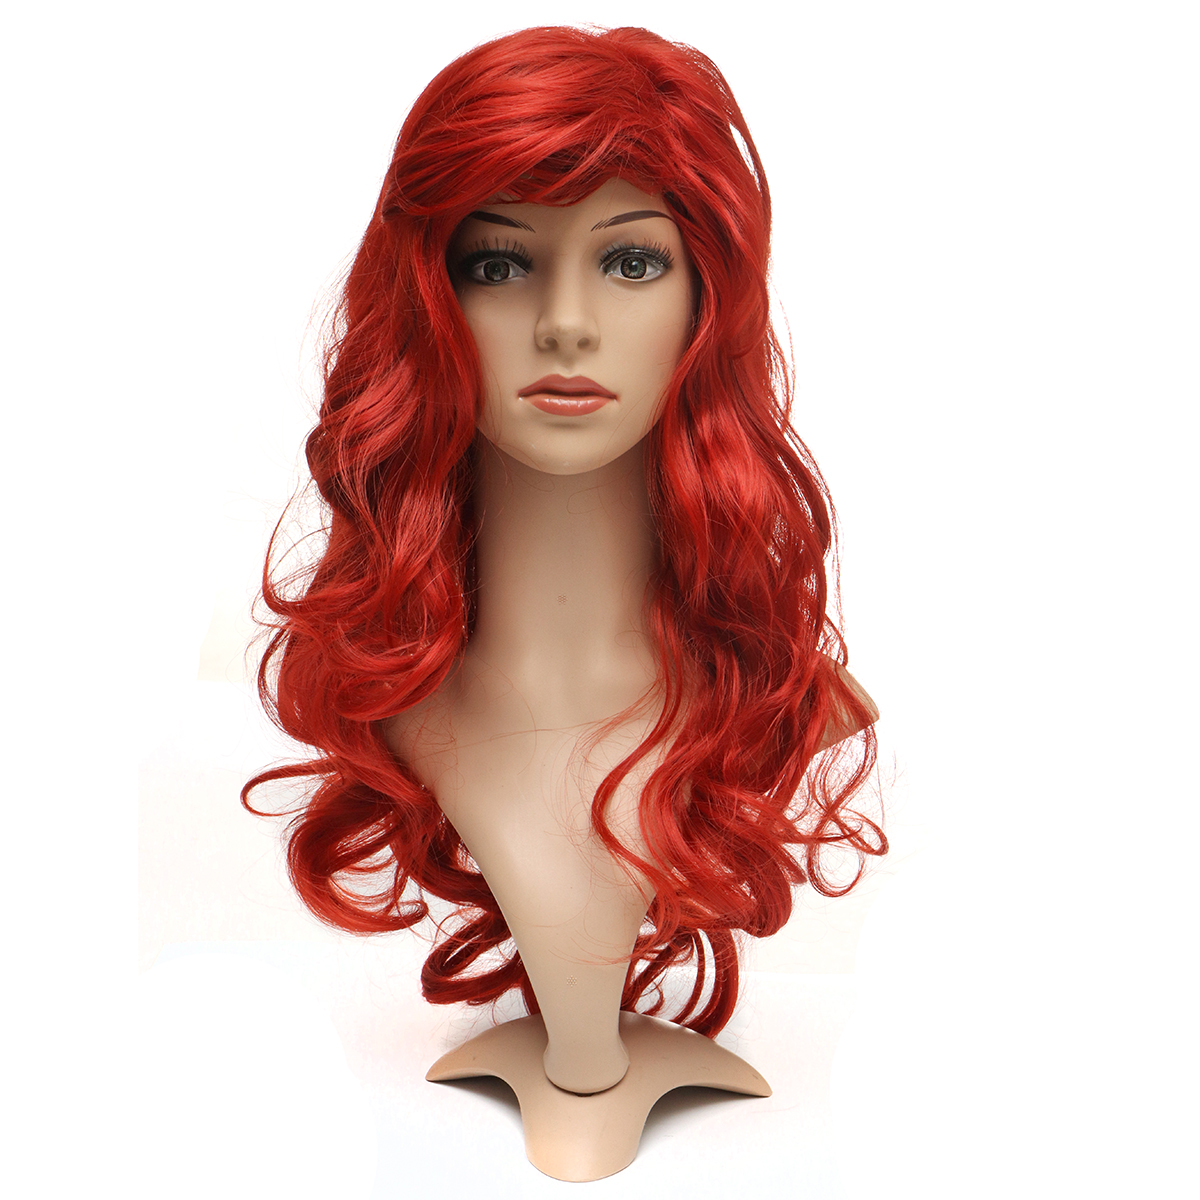 24inch-Synthetic-Former-Lace-Wig-Long-Wavy-Hair-Full-Wigs-Cosplay-With-Classic-Cap-1298032